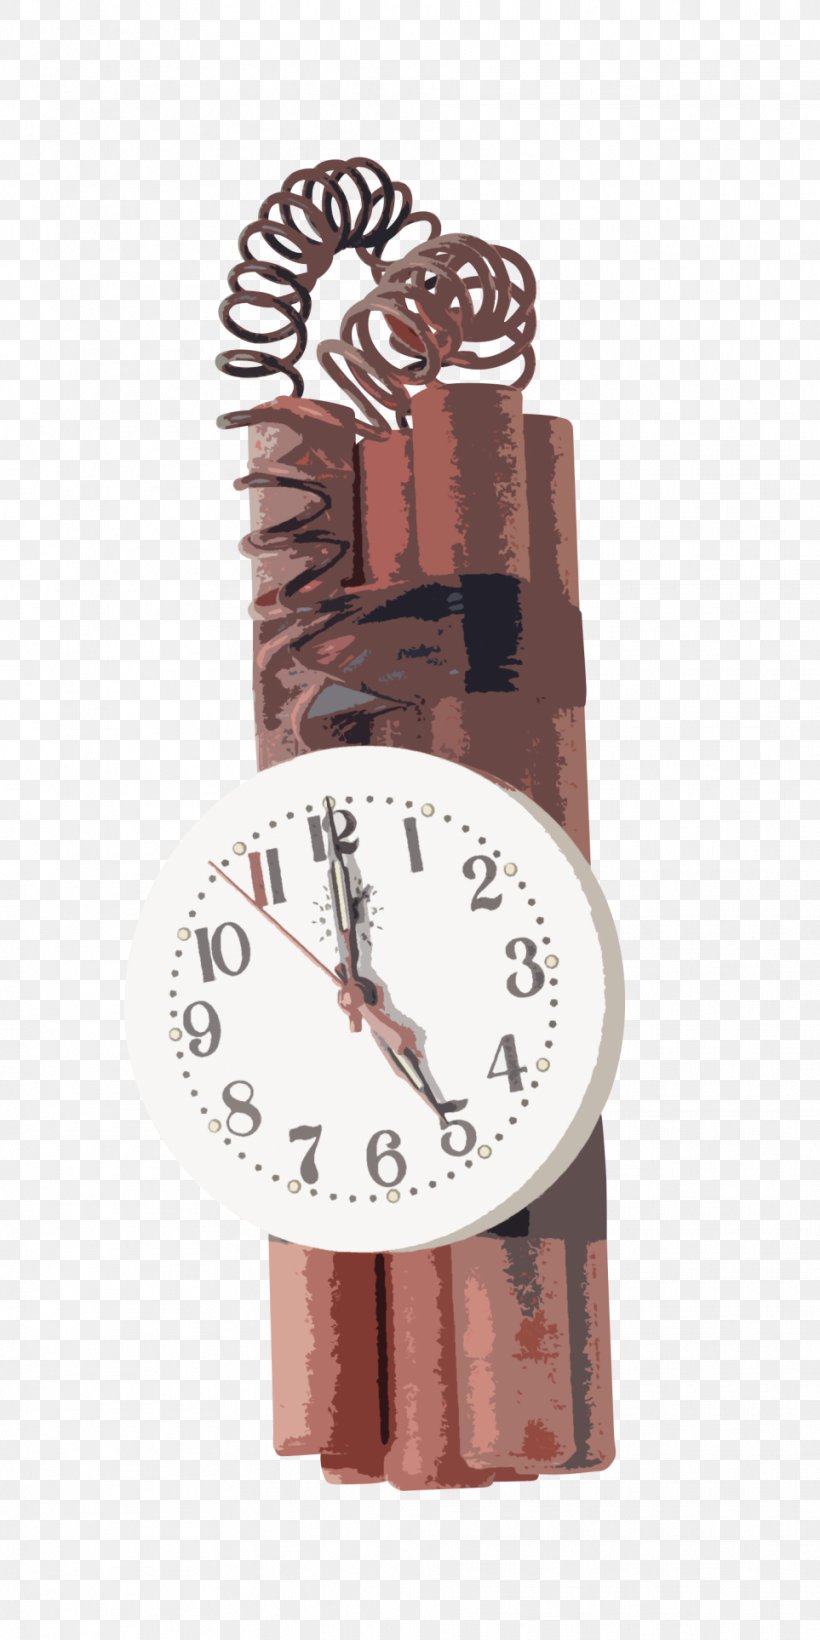 Time Bomb Image Clip Art, PNG, 963x1926px, Time Bomb, Analog Watch, Bomb, Clock, Explosion Download Free